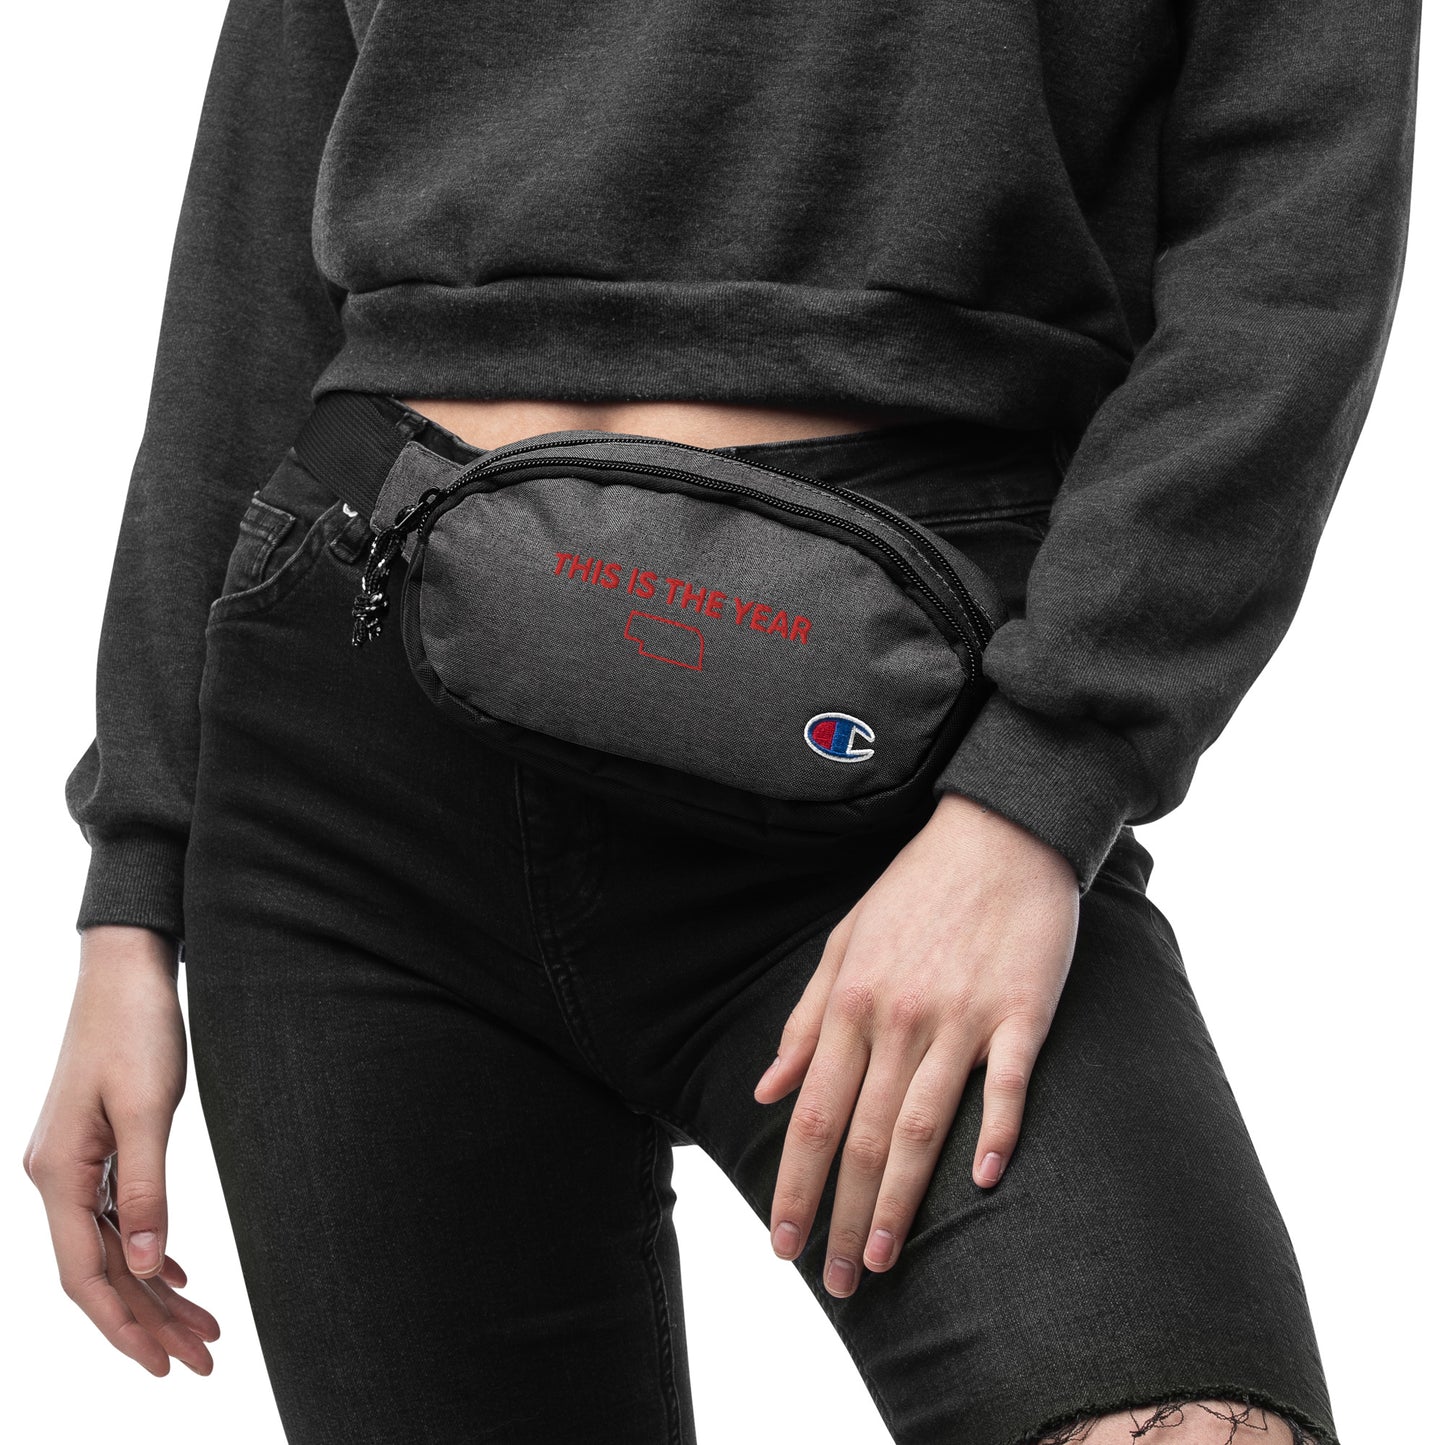 This Is The Year Fanny Pack